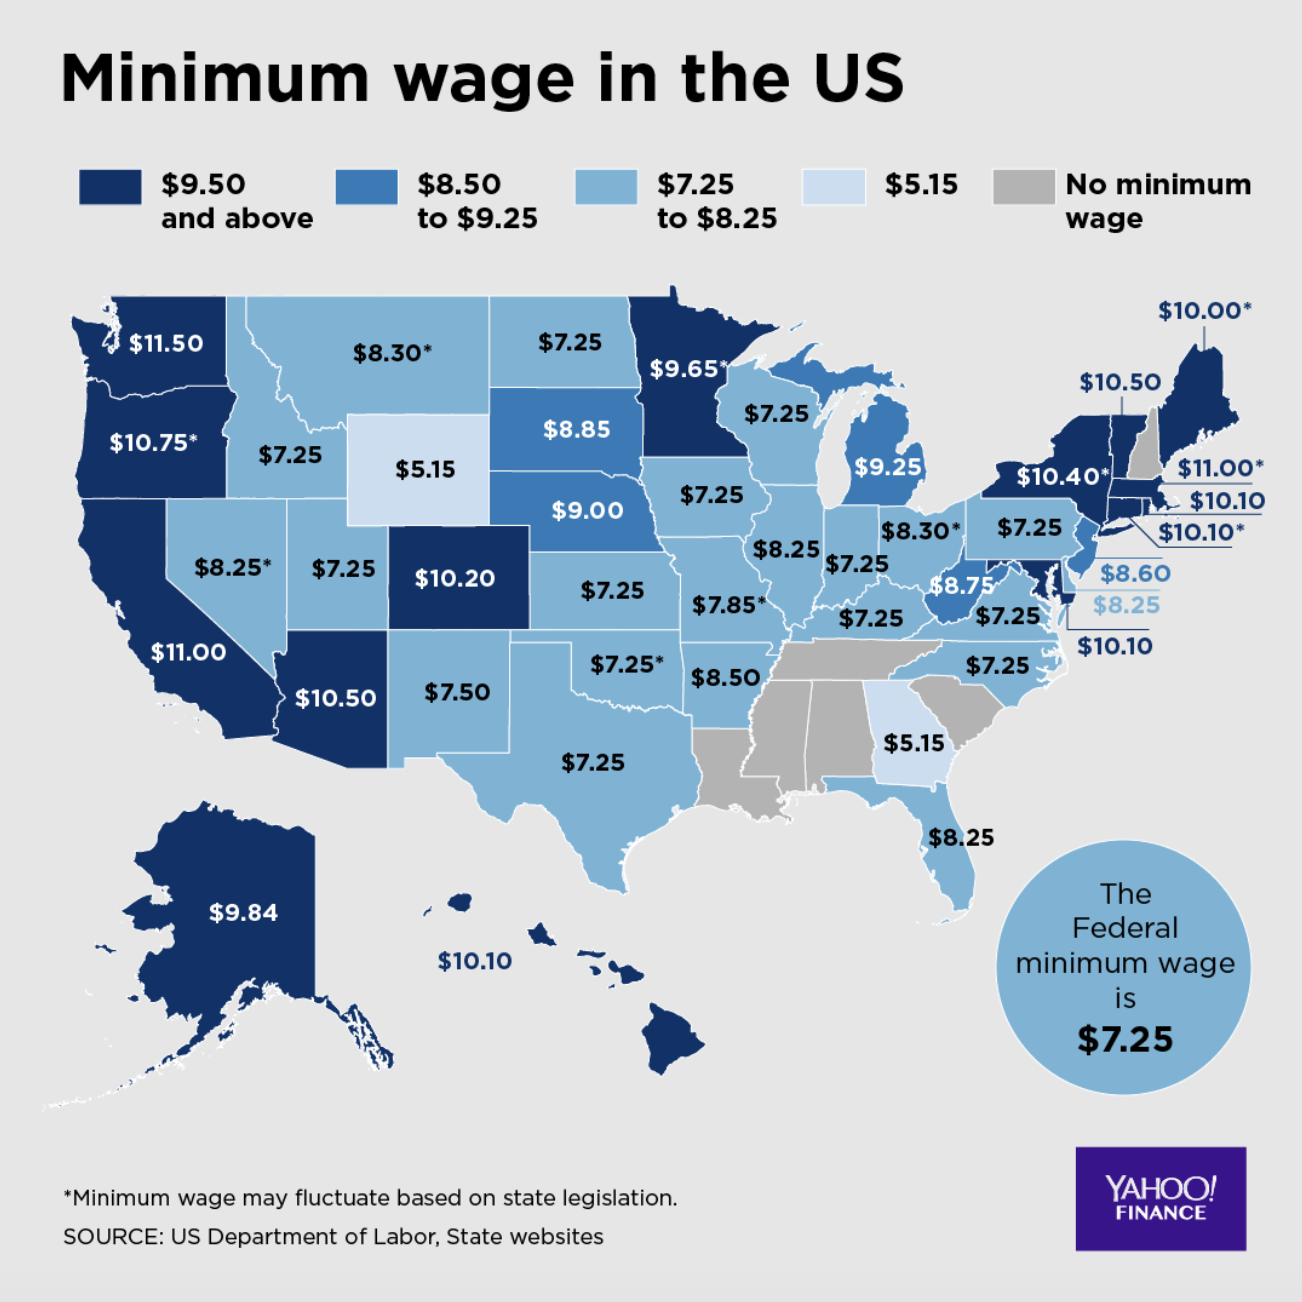 CBO 15 minimum wage would boost pay for 17 million workers